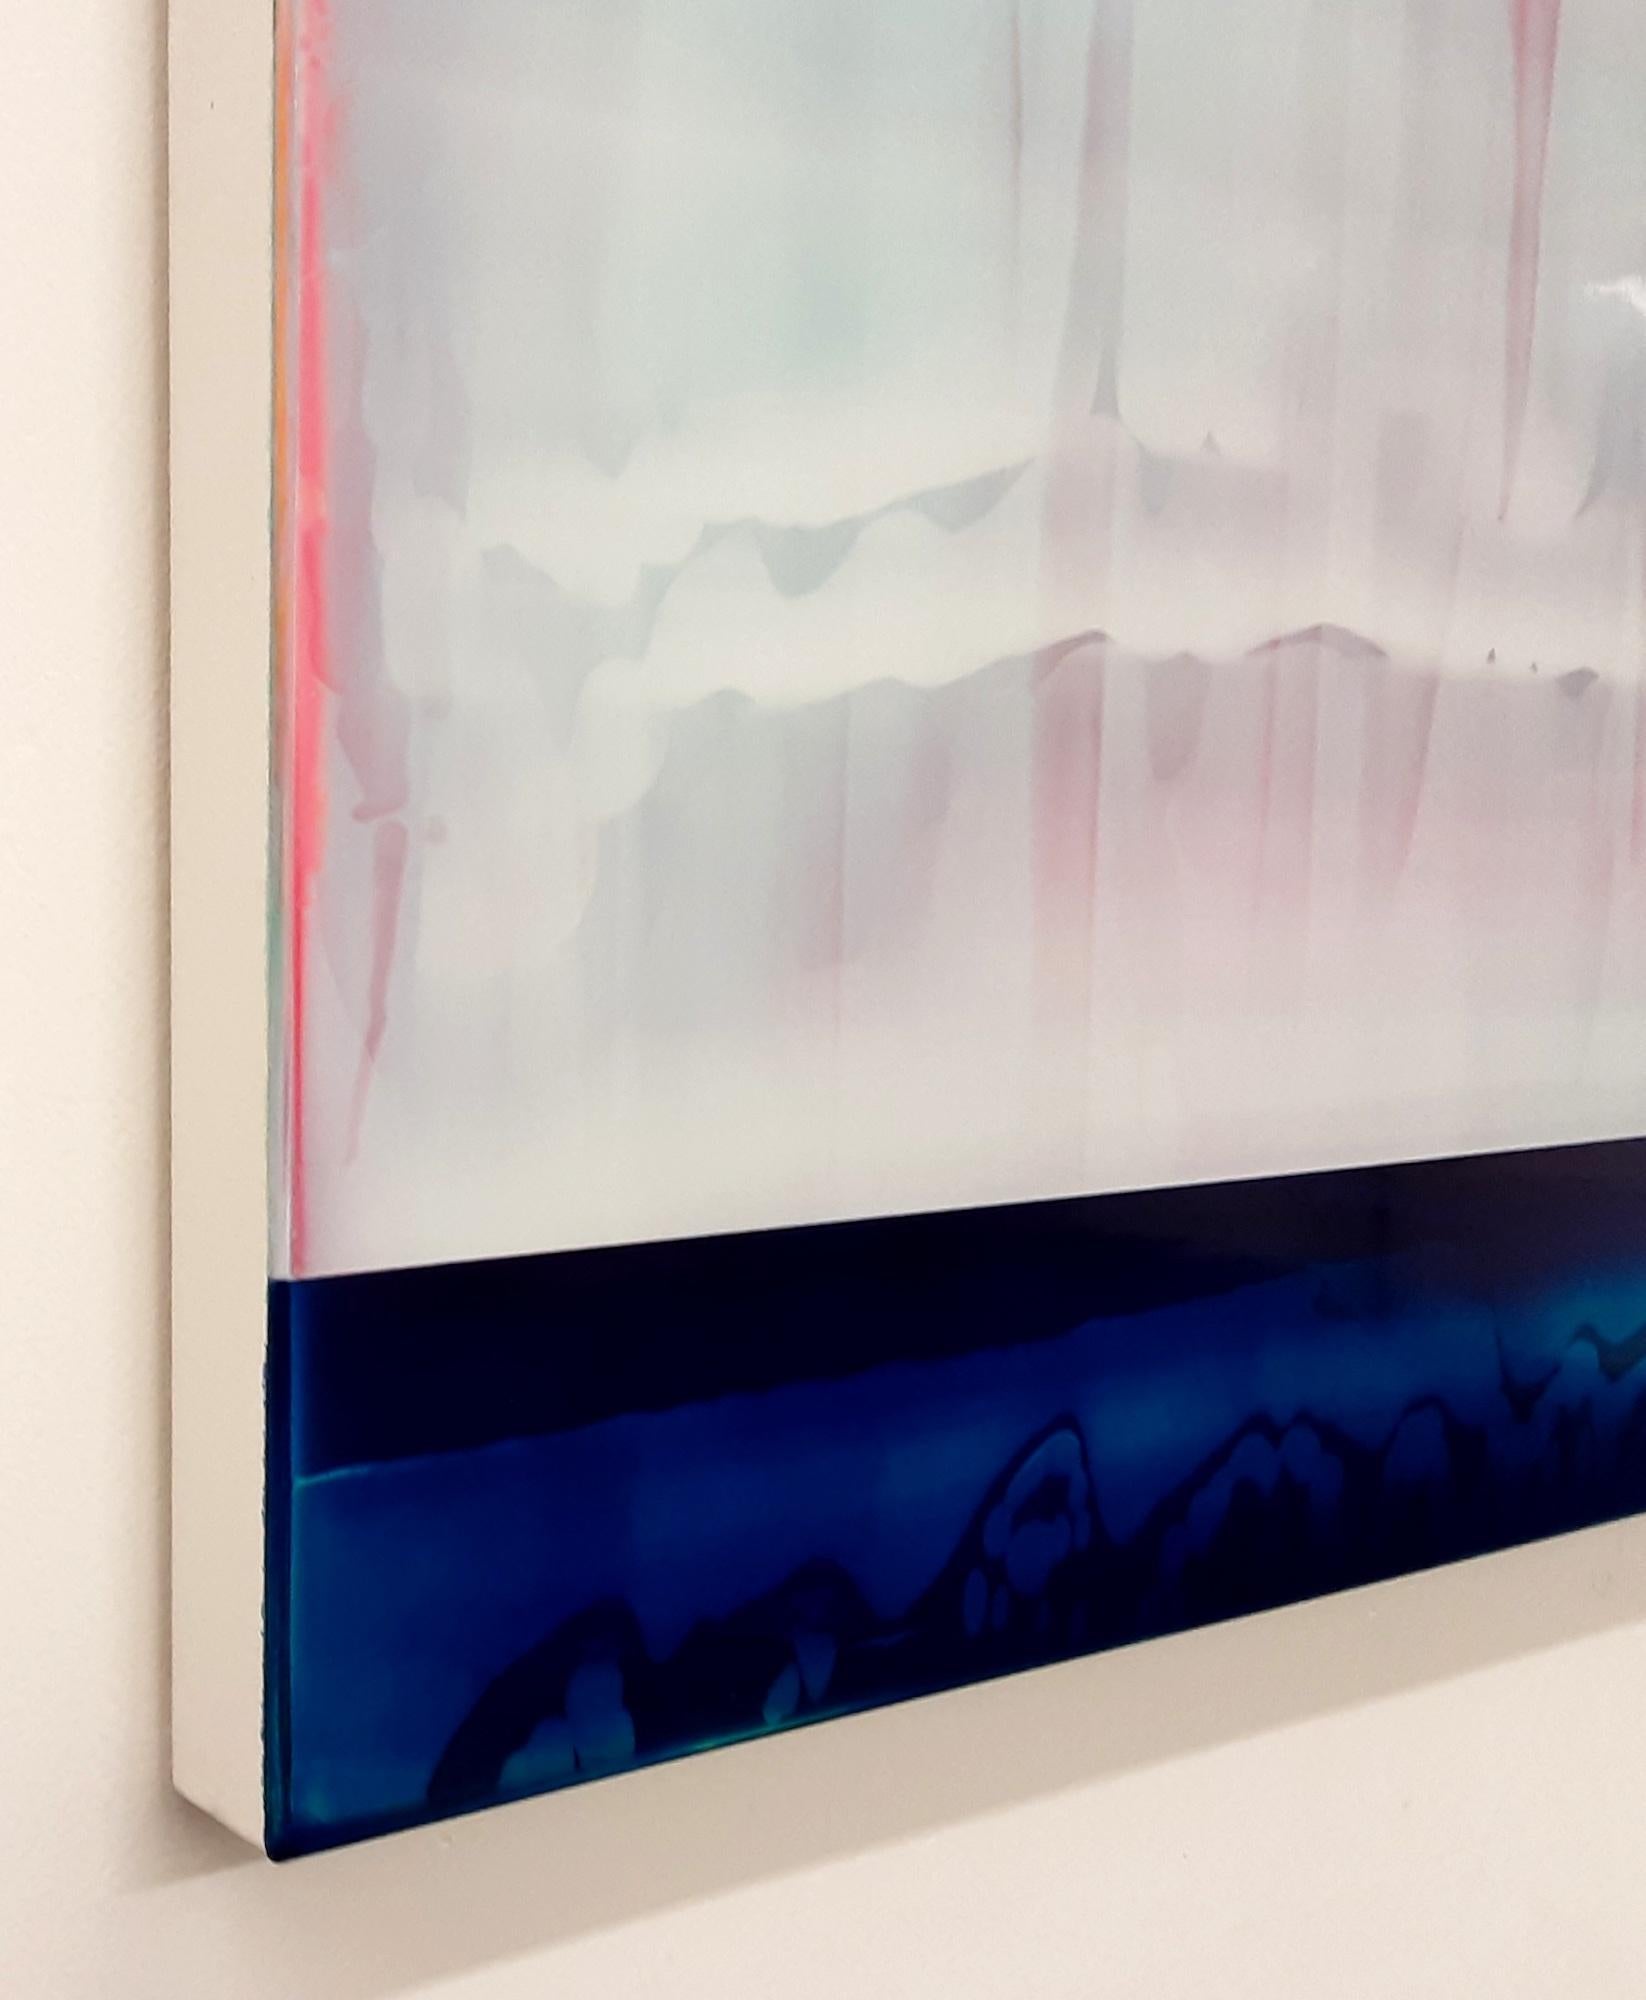 Lucent (4/19) by James Lumsden - Abstract colour painting, pink and light blue For Sale 10